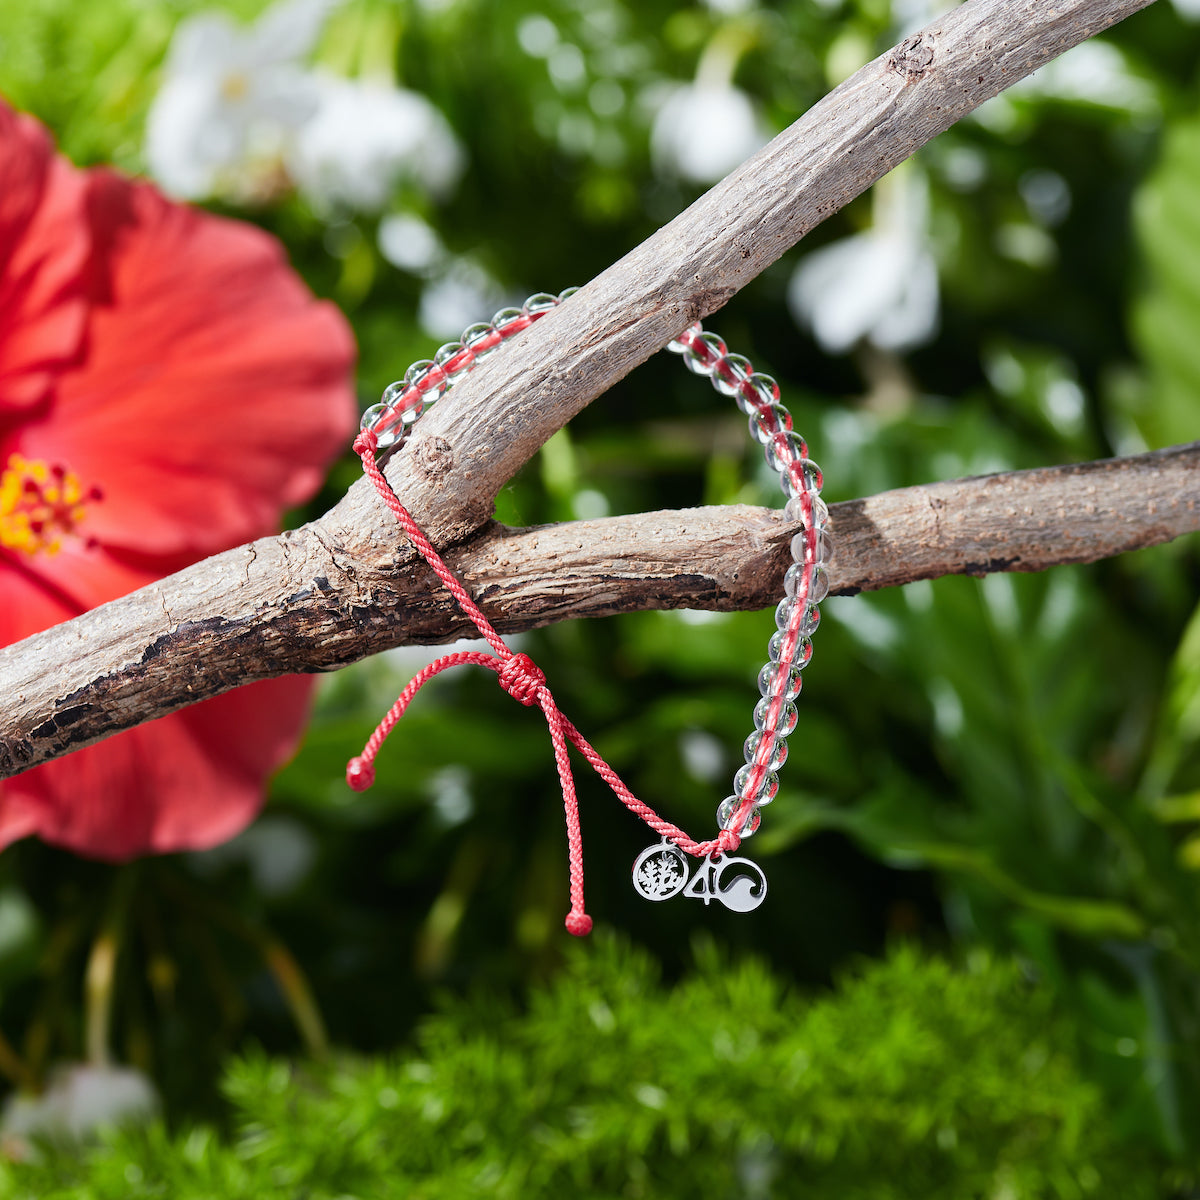 4Ocean Hawaiian Coral Reef Bracelet, with red recycled plastic cord, colorless recycled glass beads, and recycled steel metal charms. It is hanging on a tree branch in front of a bright red hibiscus flower and lush green background.